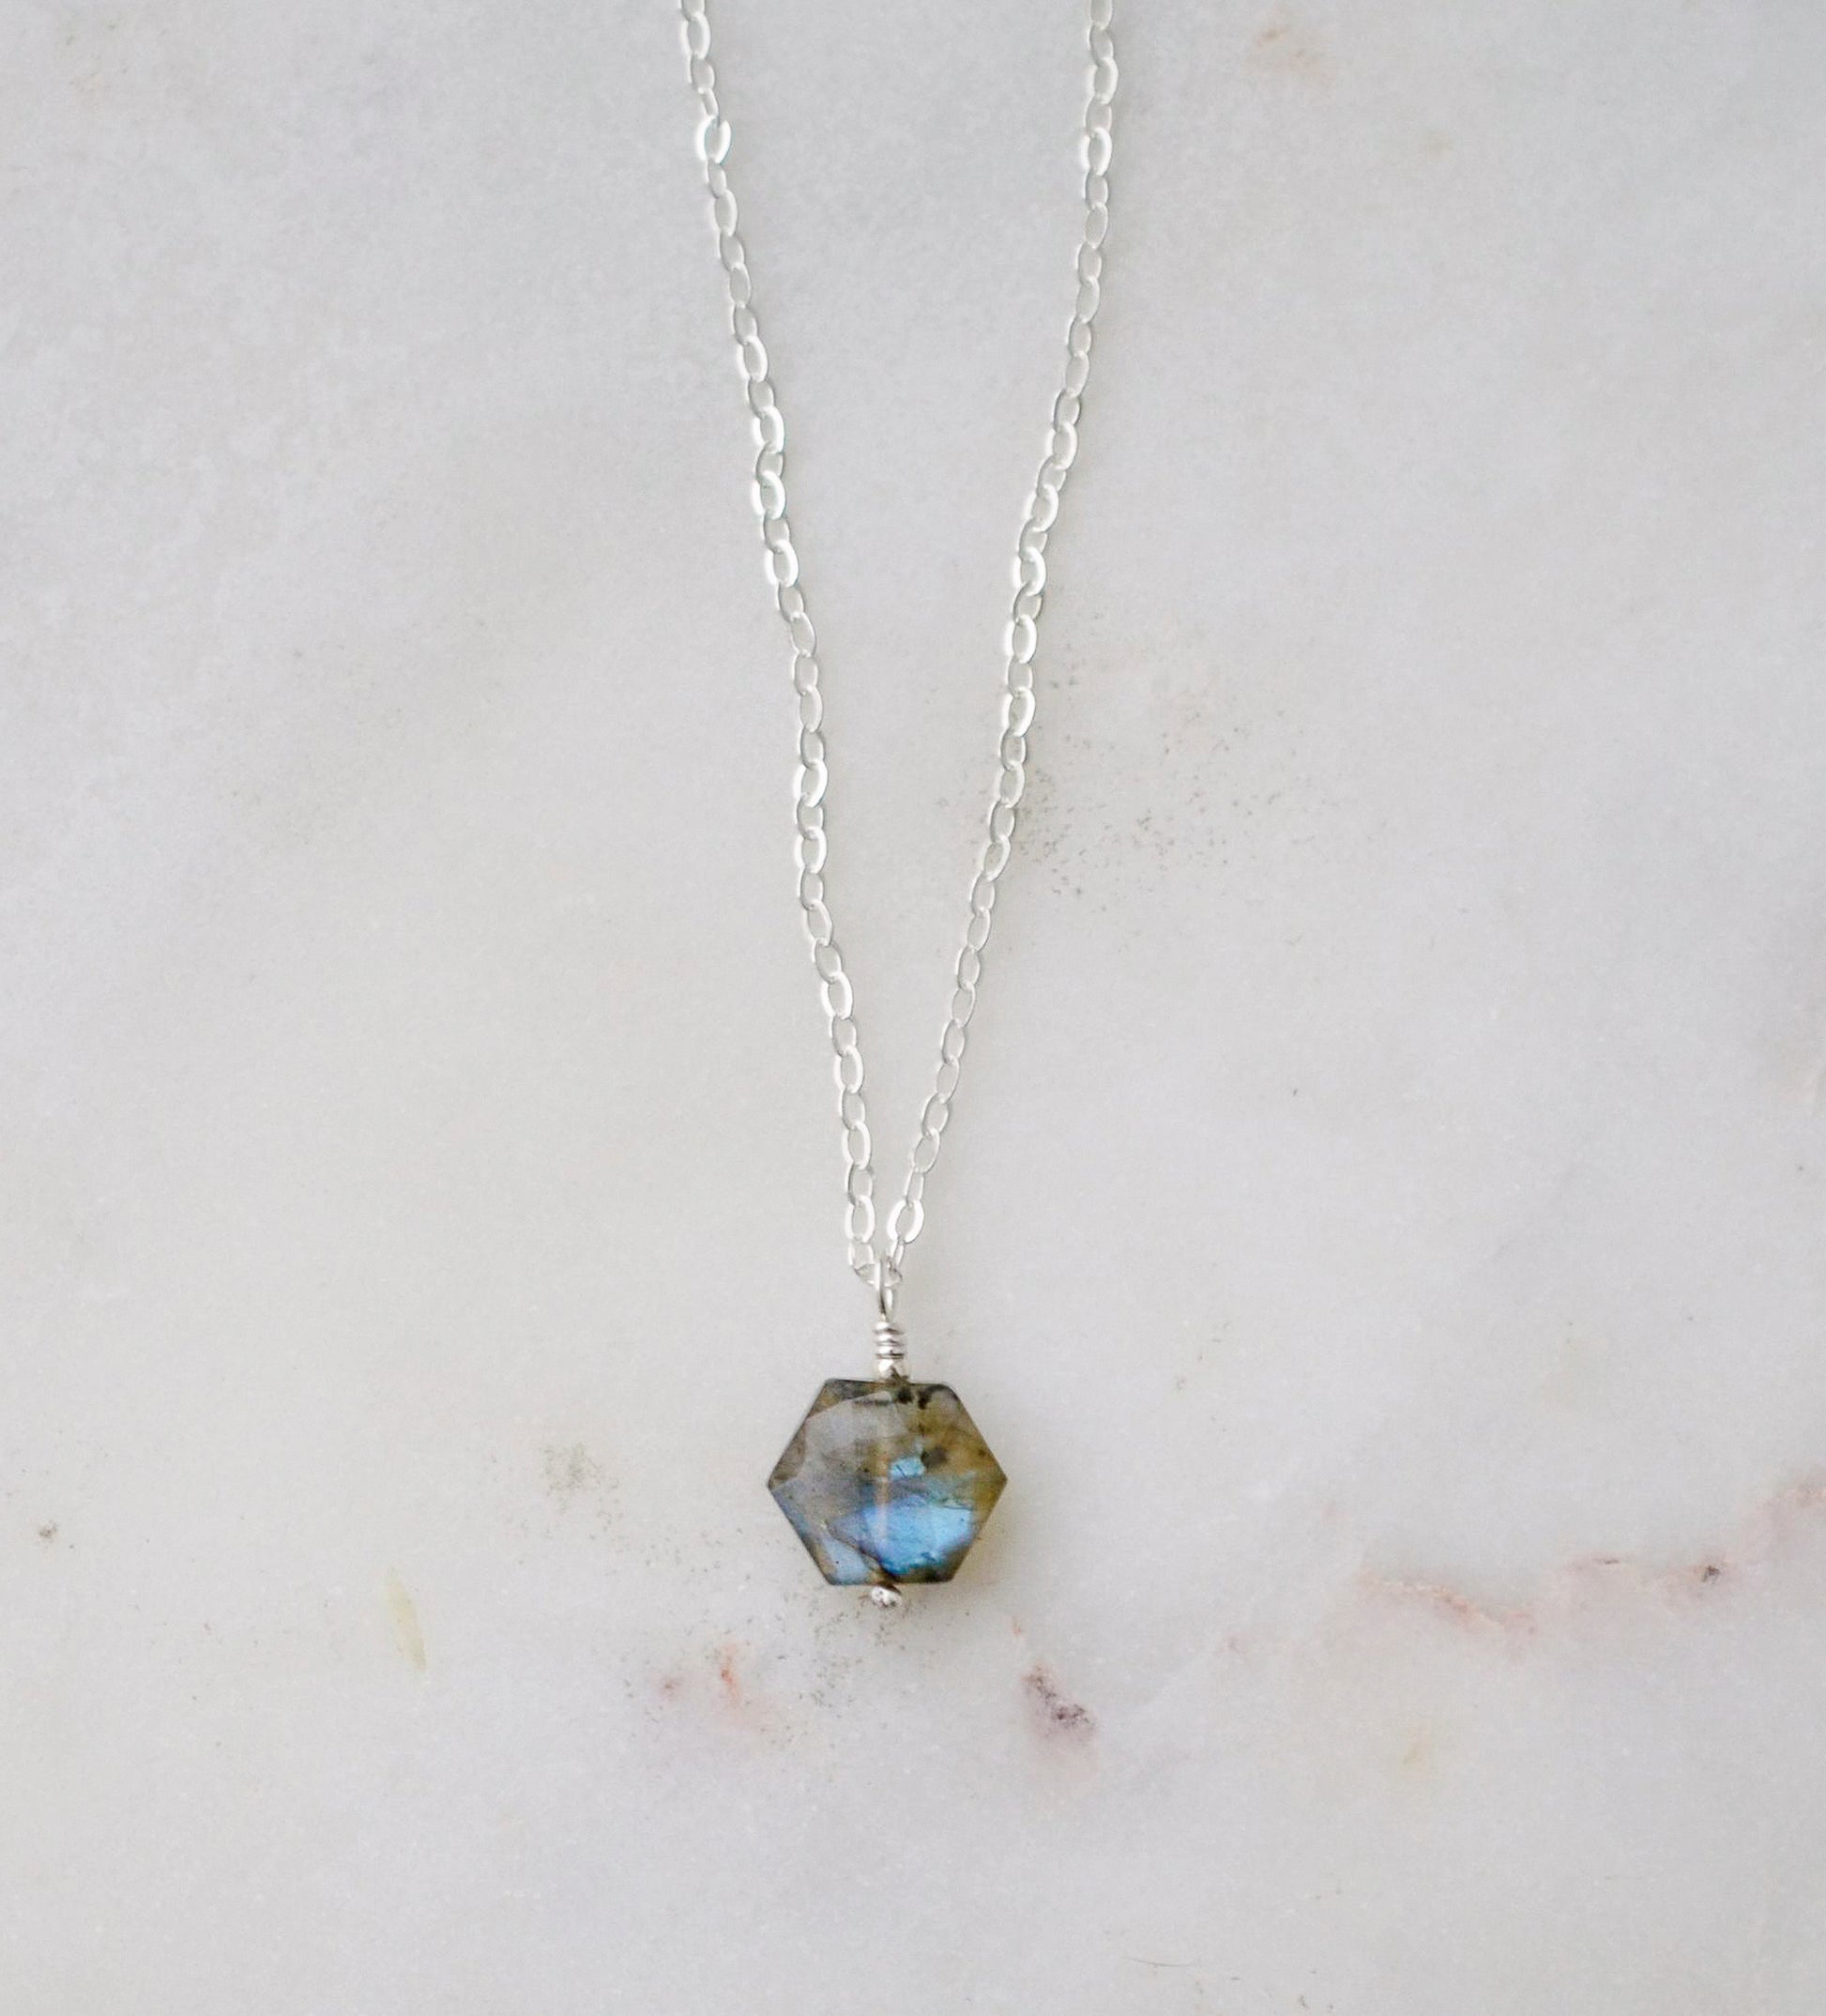 Blue - green natural labradorite gemstone in a hexagonal shape shown on a sterling silver chain.